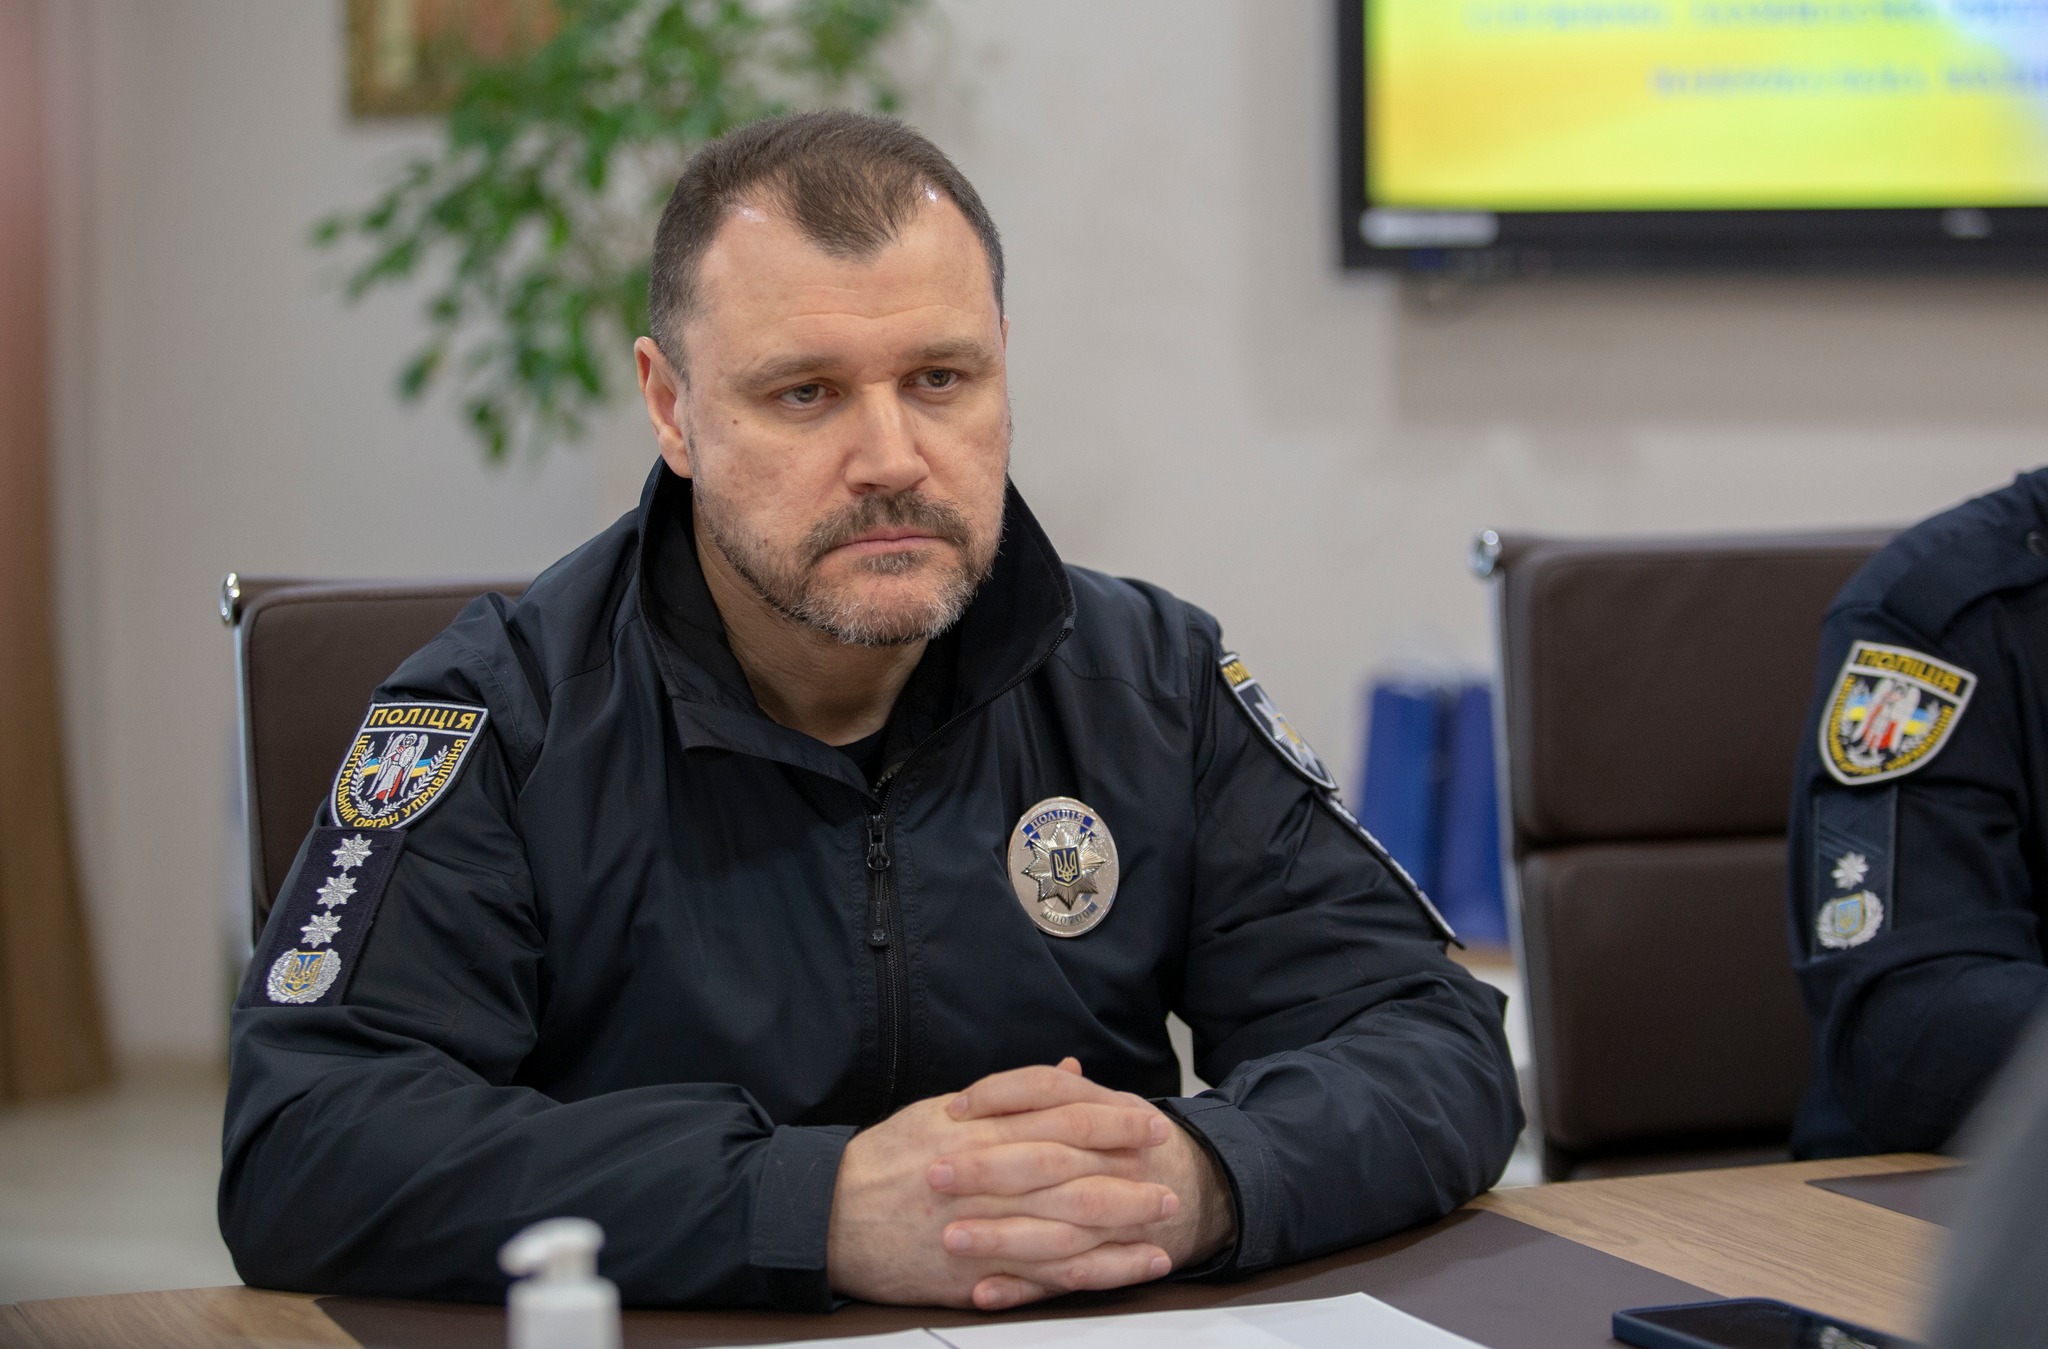 Police chief Klymenko appointed acting interior minister following death of Monastyrsky